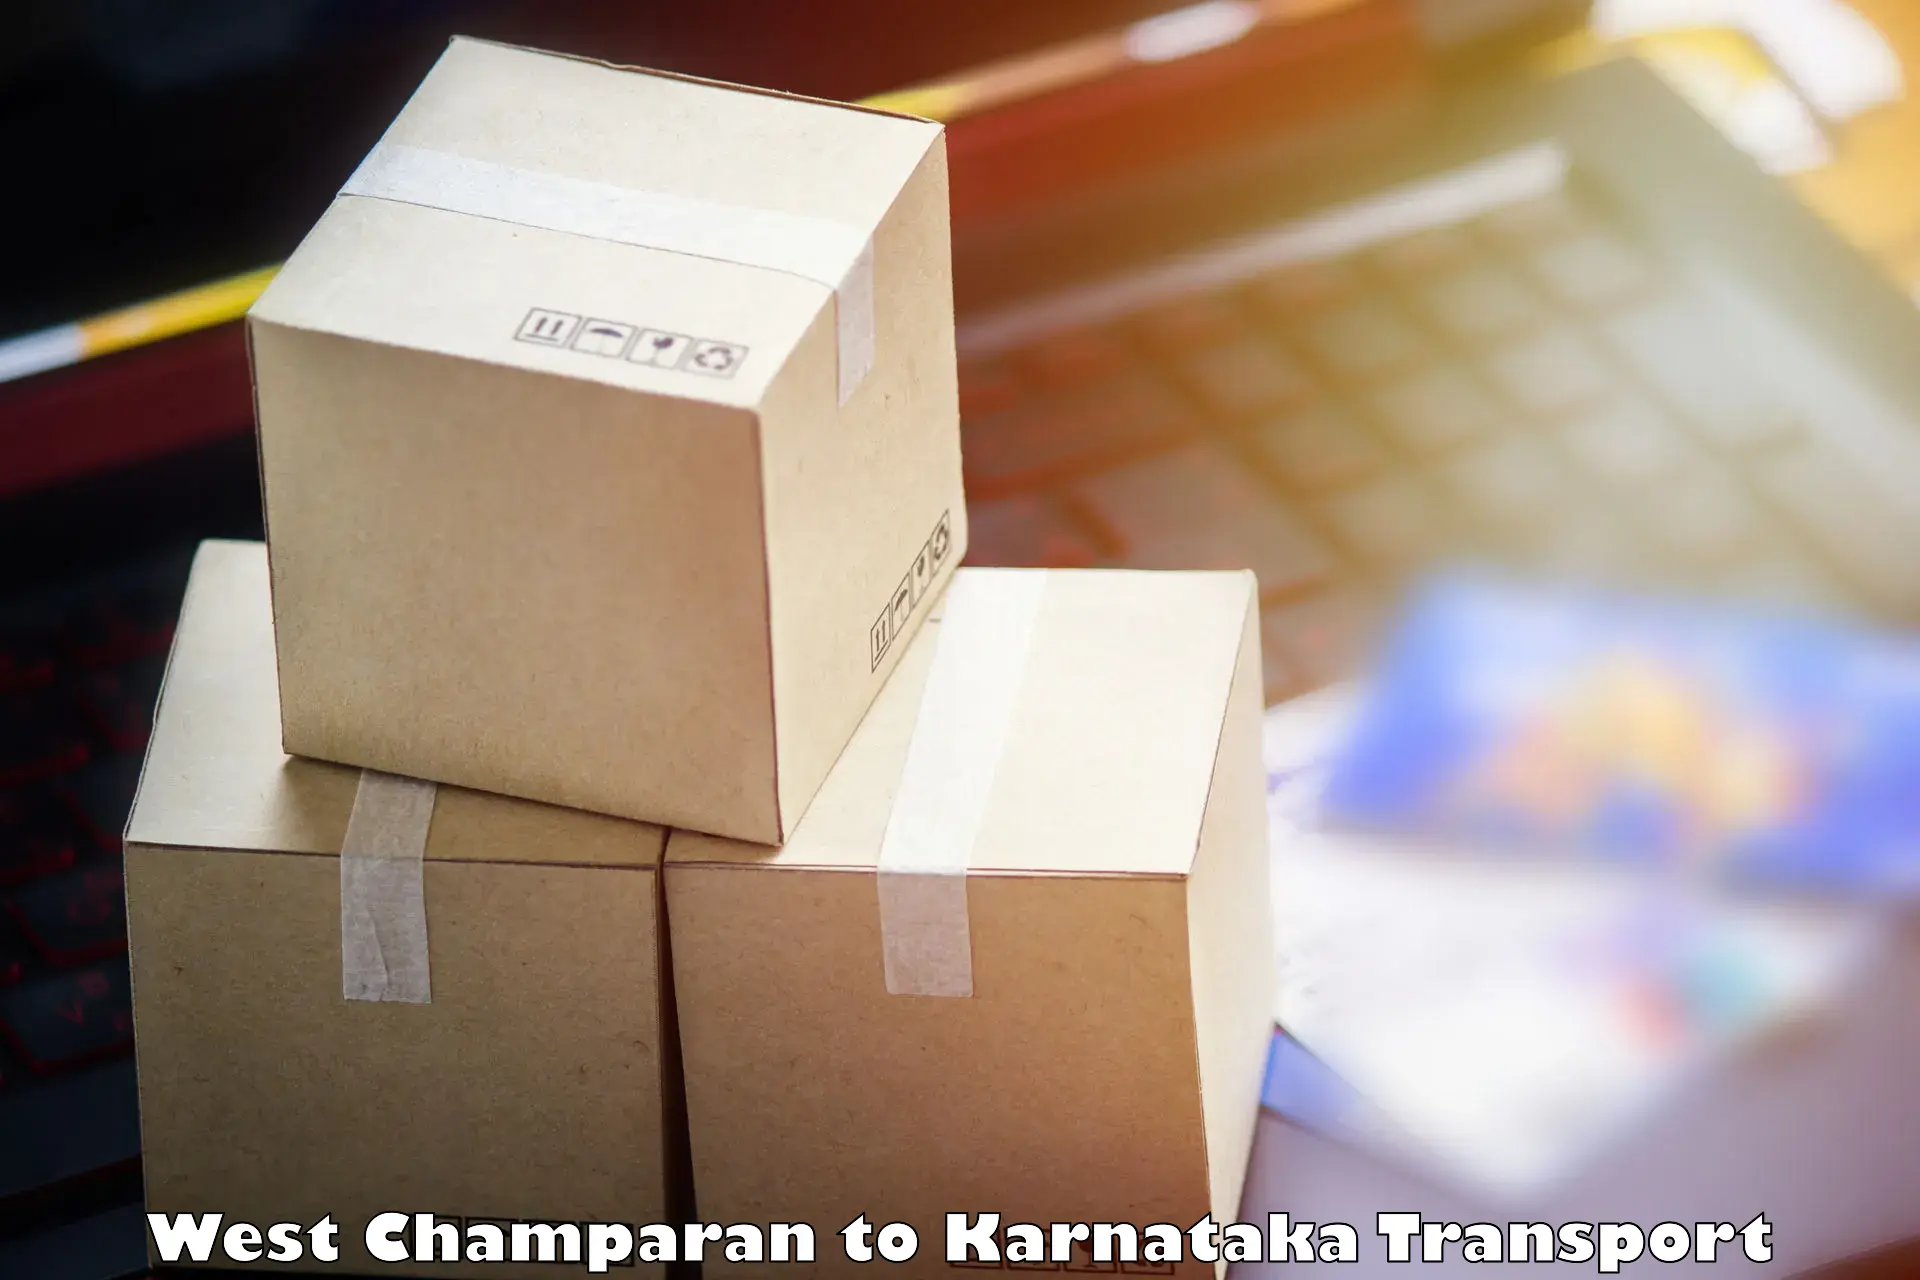 Delivery service West Champaran to Ramanathapura